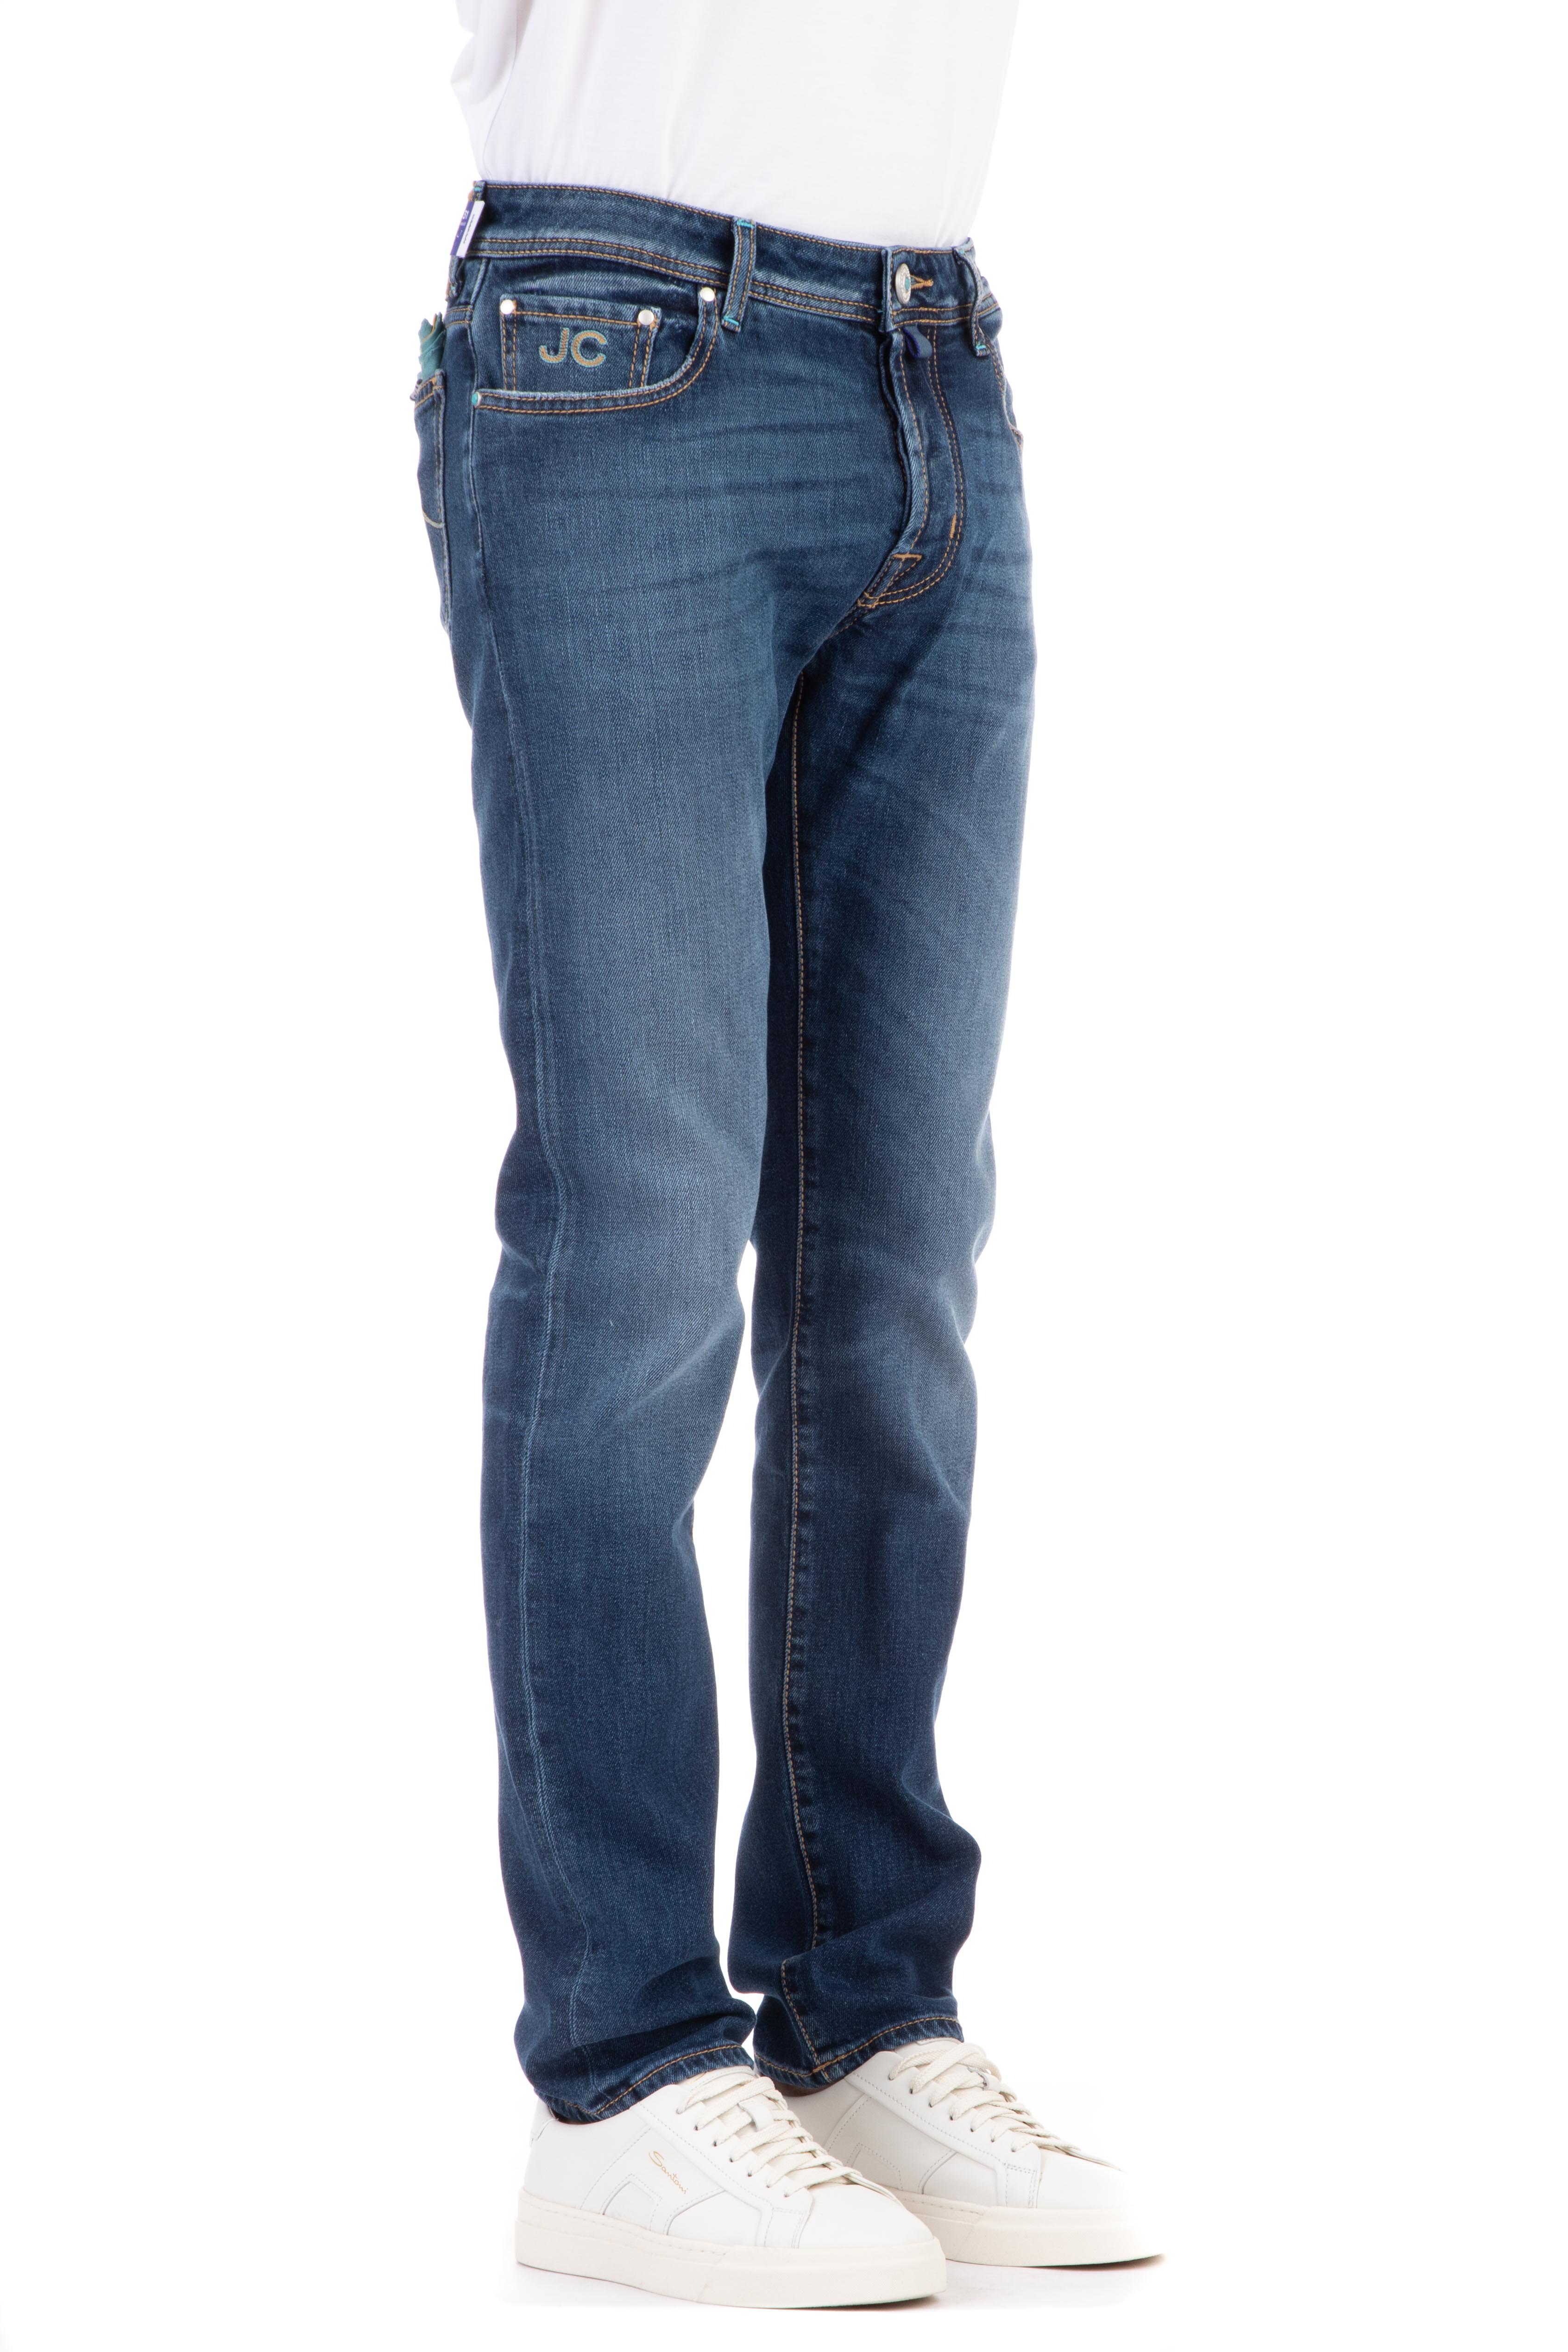 Jeans in cotone-lyocell etichetta special bard fit